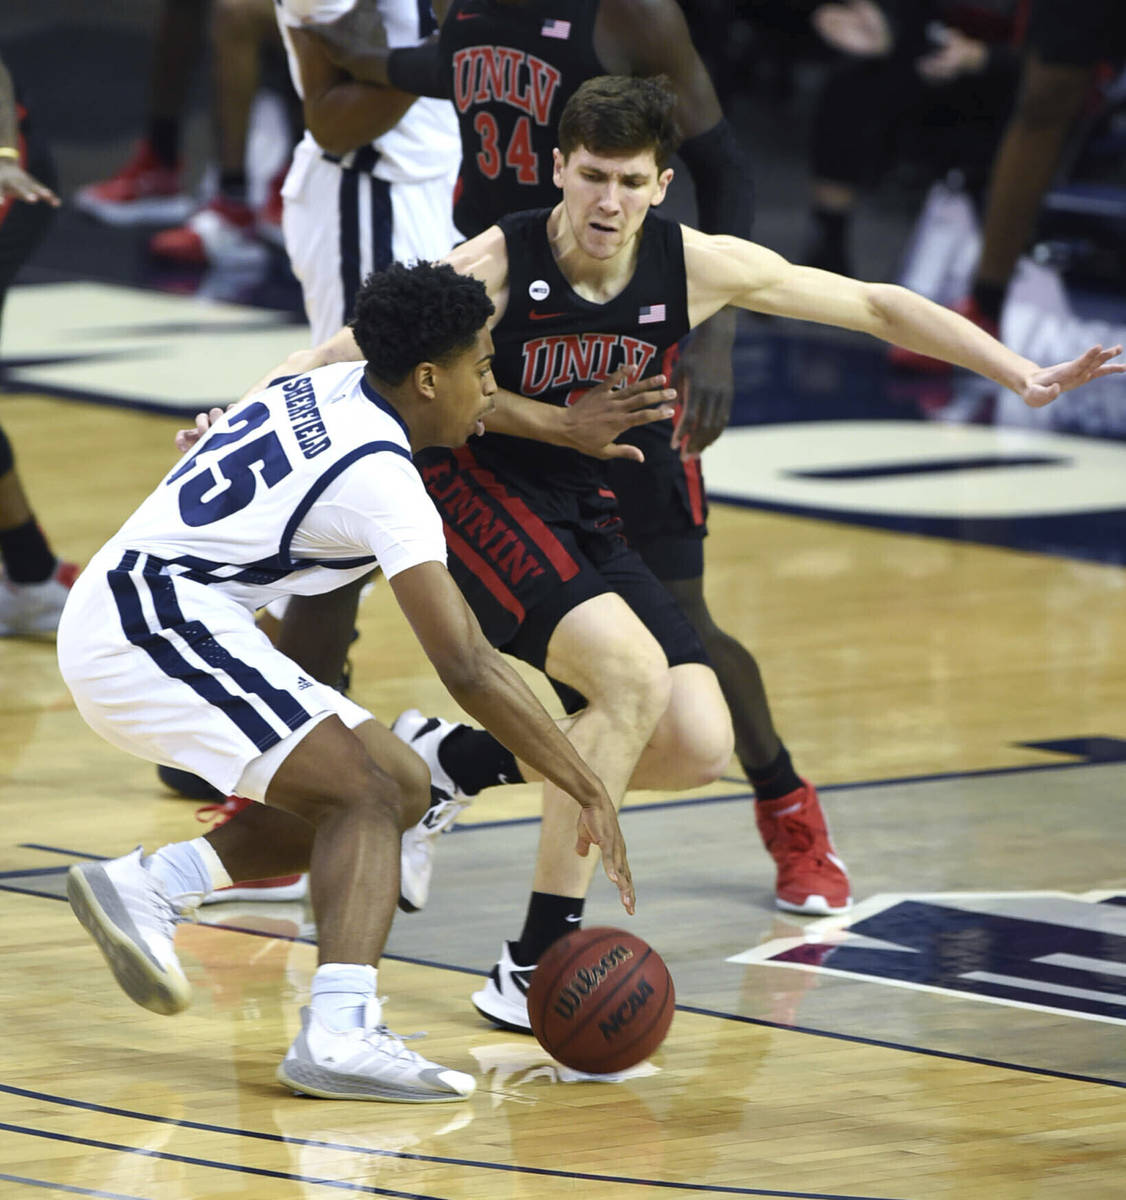 Nevada's Grant Sherfield dribbles the ball against UNLV during the first half of an NCAA colleg ...